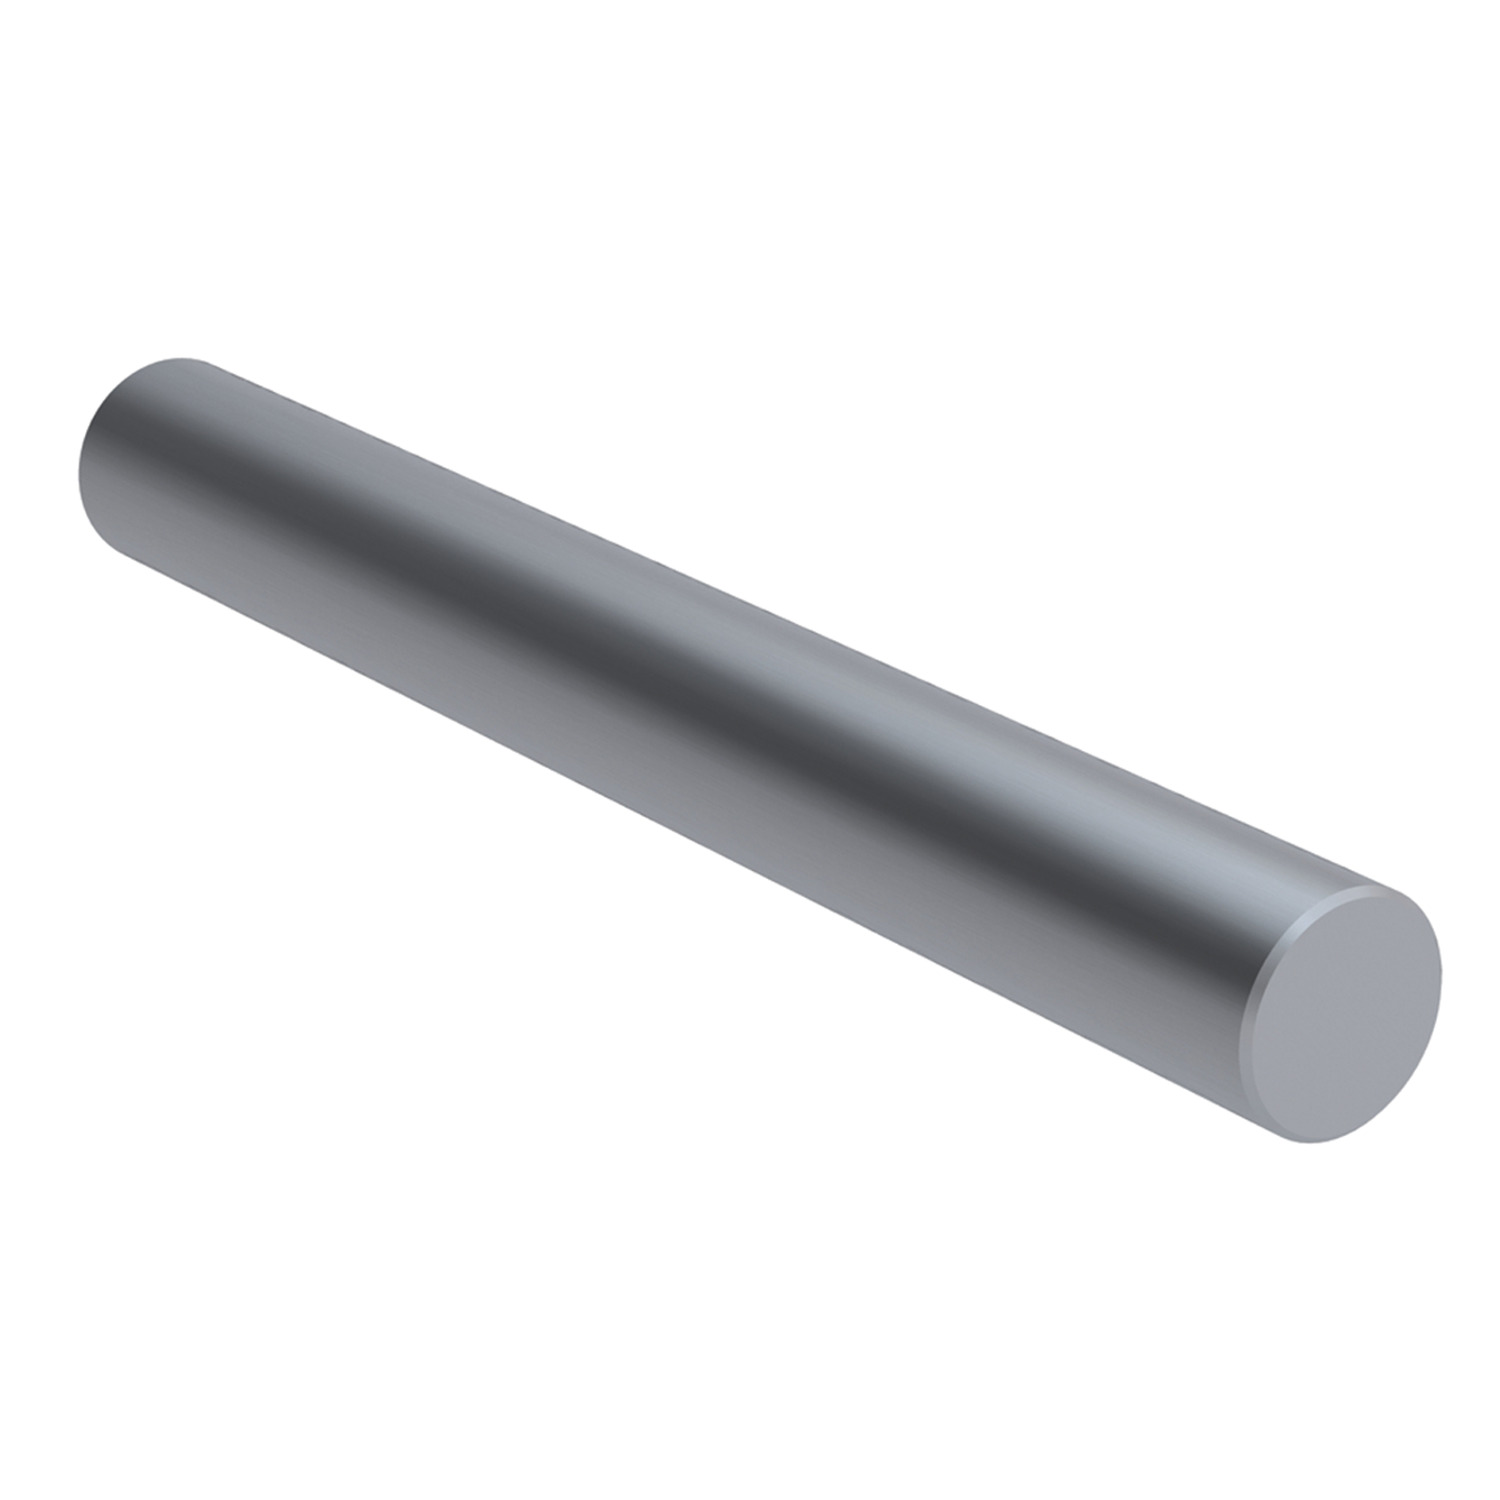 Hard Stainless Linear Shafts Stainless steel Guide Shafts for linear motion. Hardened, corrosion resistant stainless steel (440C).